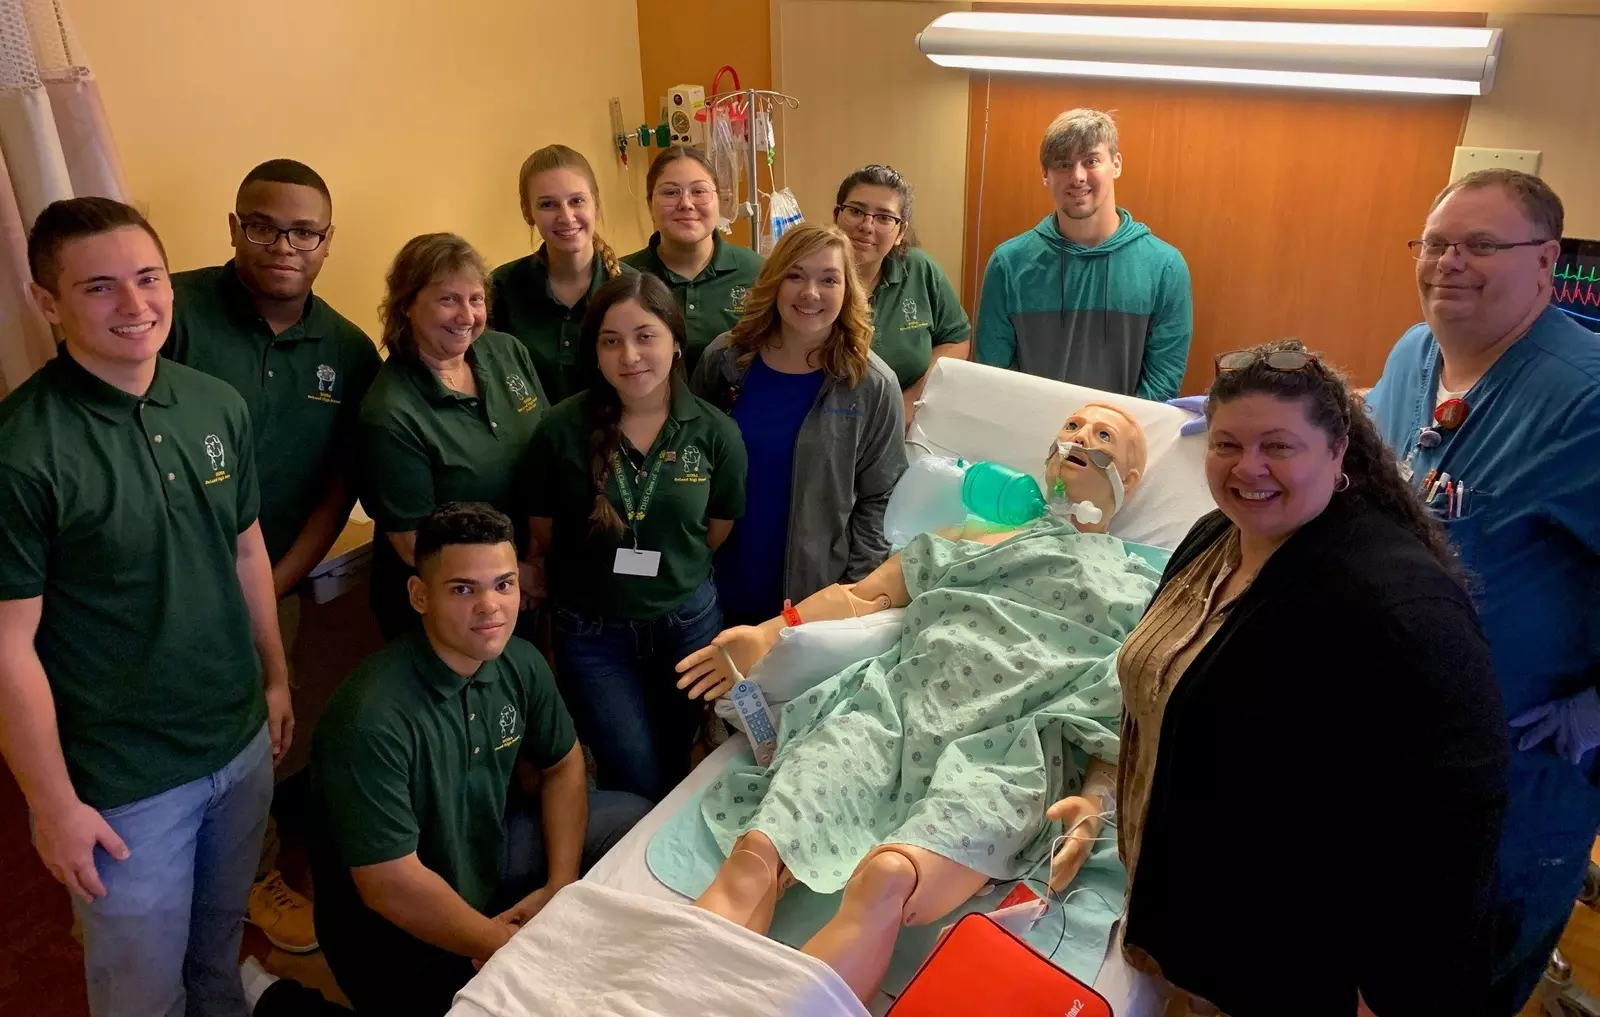 Seniors from DeLand High School’s medical academy recently toured AdventHealth DeLand as part of the teenagers’ first step towards internships and job shadowing opportunities. 